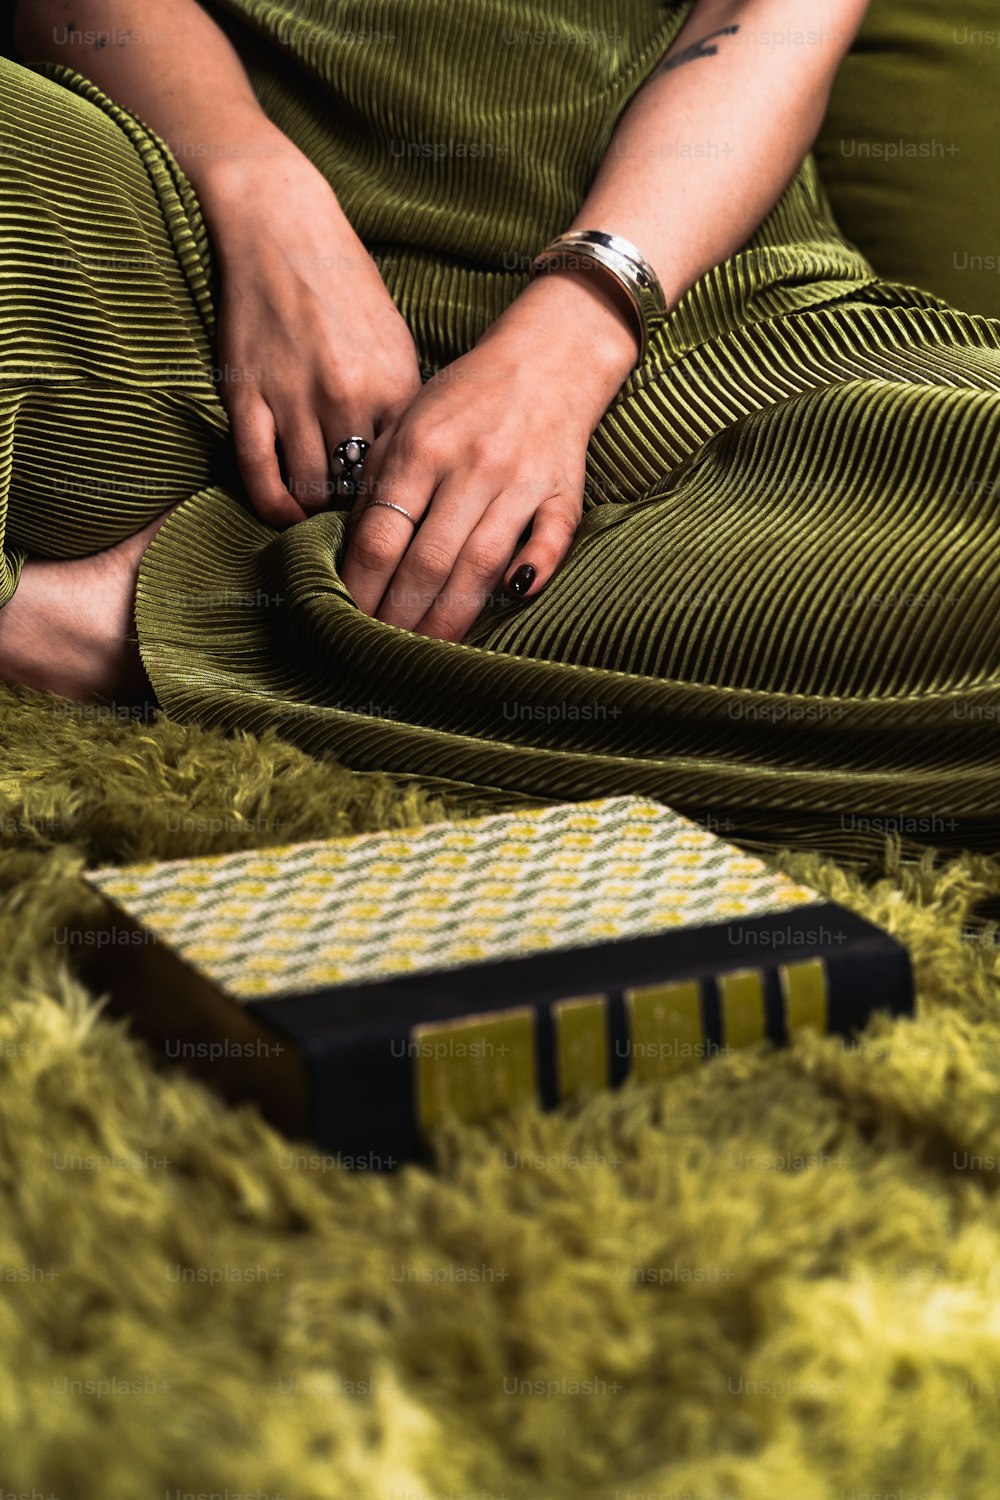 a woman sitting on a green rug with her hand on a comb